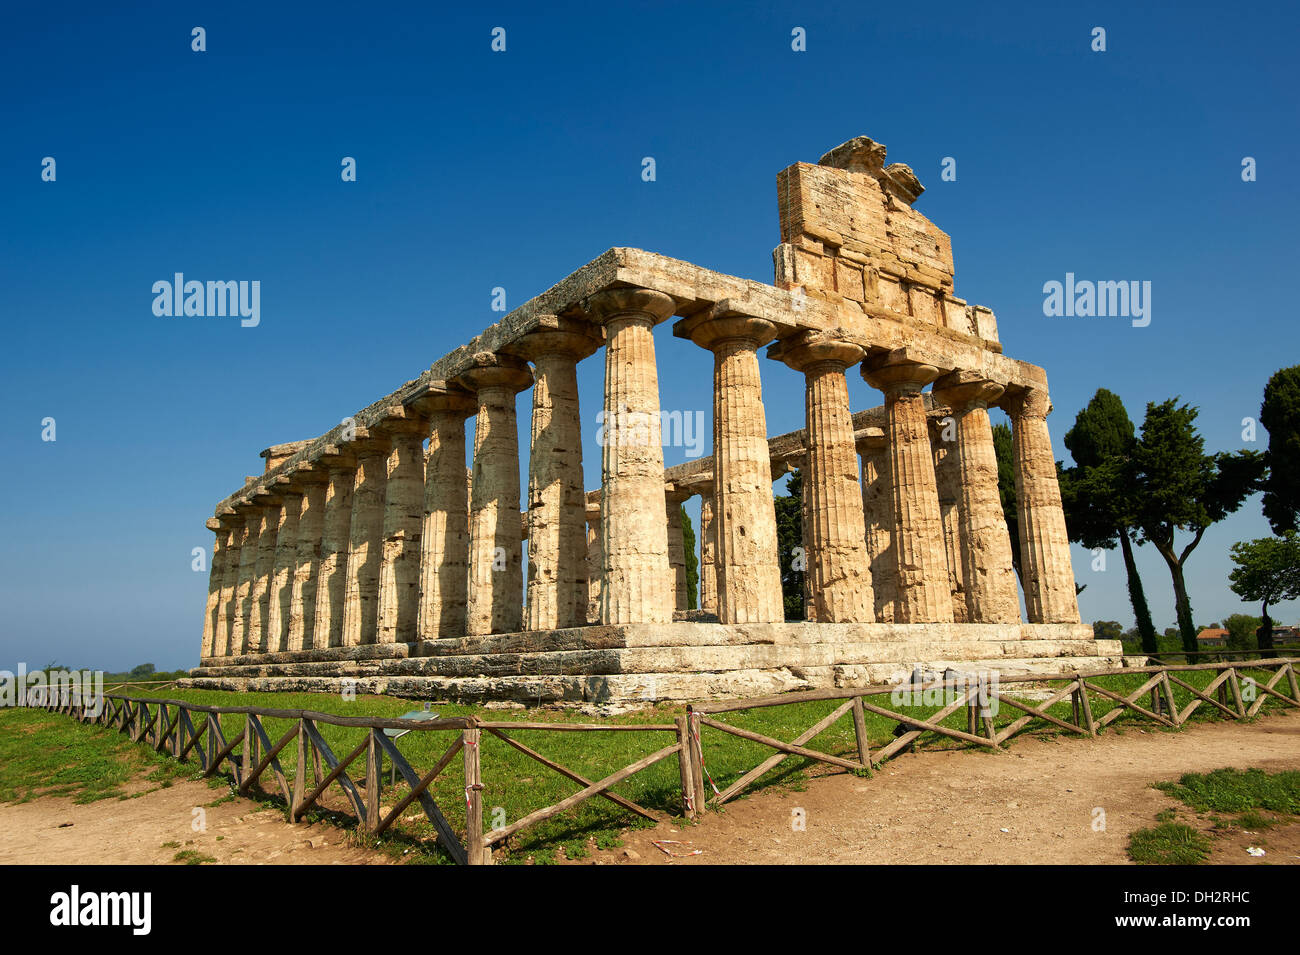 The ancient Doric Greek temple of Athena of Paestum built in about 500 BC. Paestum archaeological site, Italy. Stock Photo